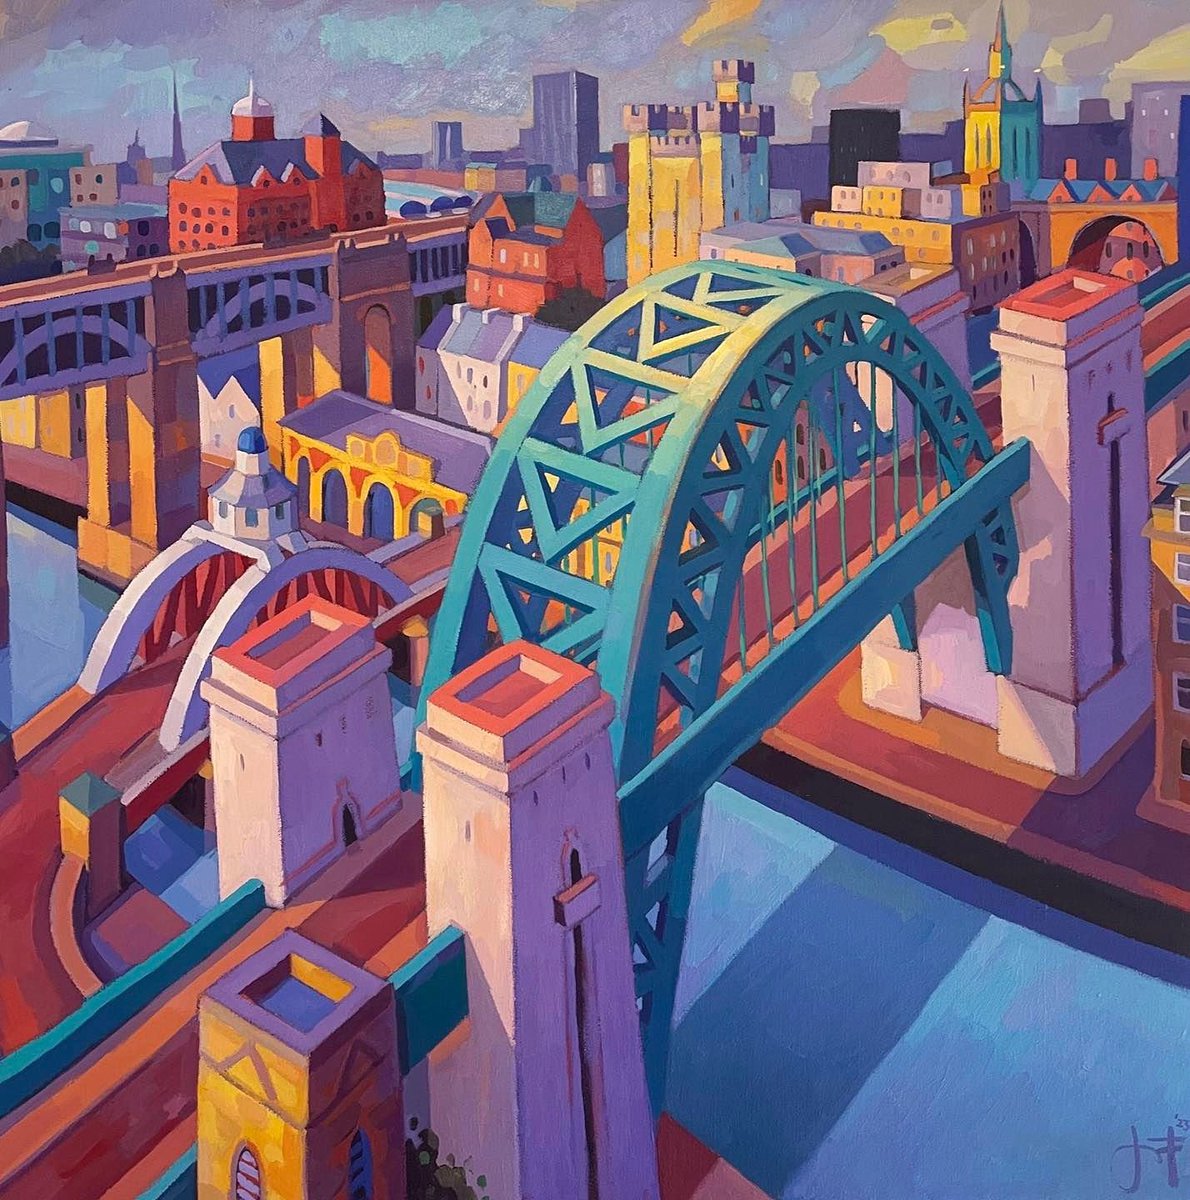 Across the Tyne Bridge - Jim Edwards Last day in the studio today, 11am-2pm. Off to the Lakes, studio will be closed till next Saturday. Across the Tyne Bridge ltd edition print available from Studio Gallery at 57 Lime St jimedwardspaintings.com/store/p428/Acr… #newcastle #gateshead #quayside